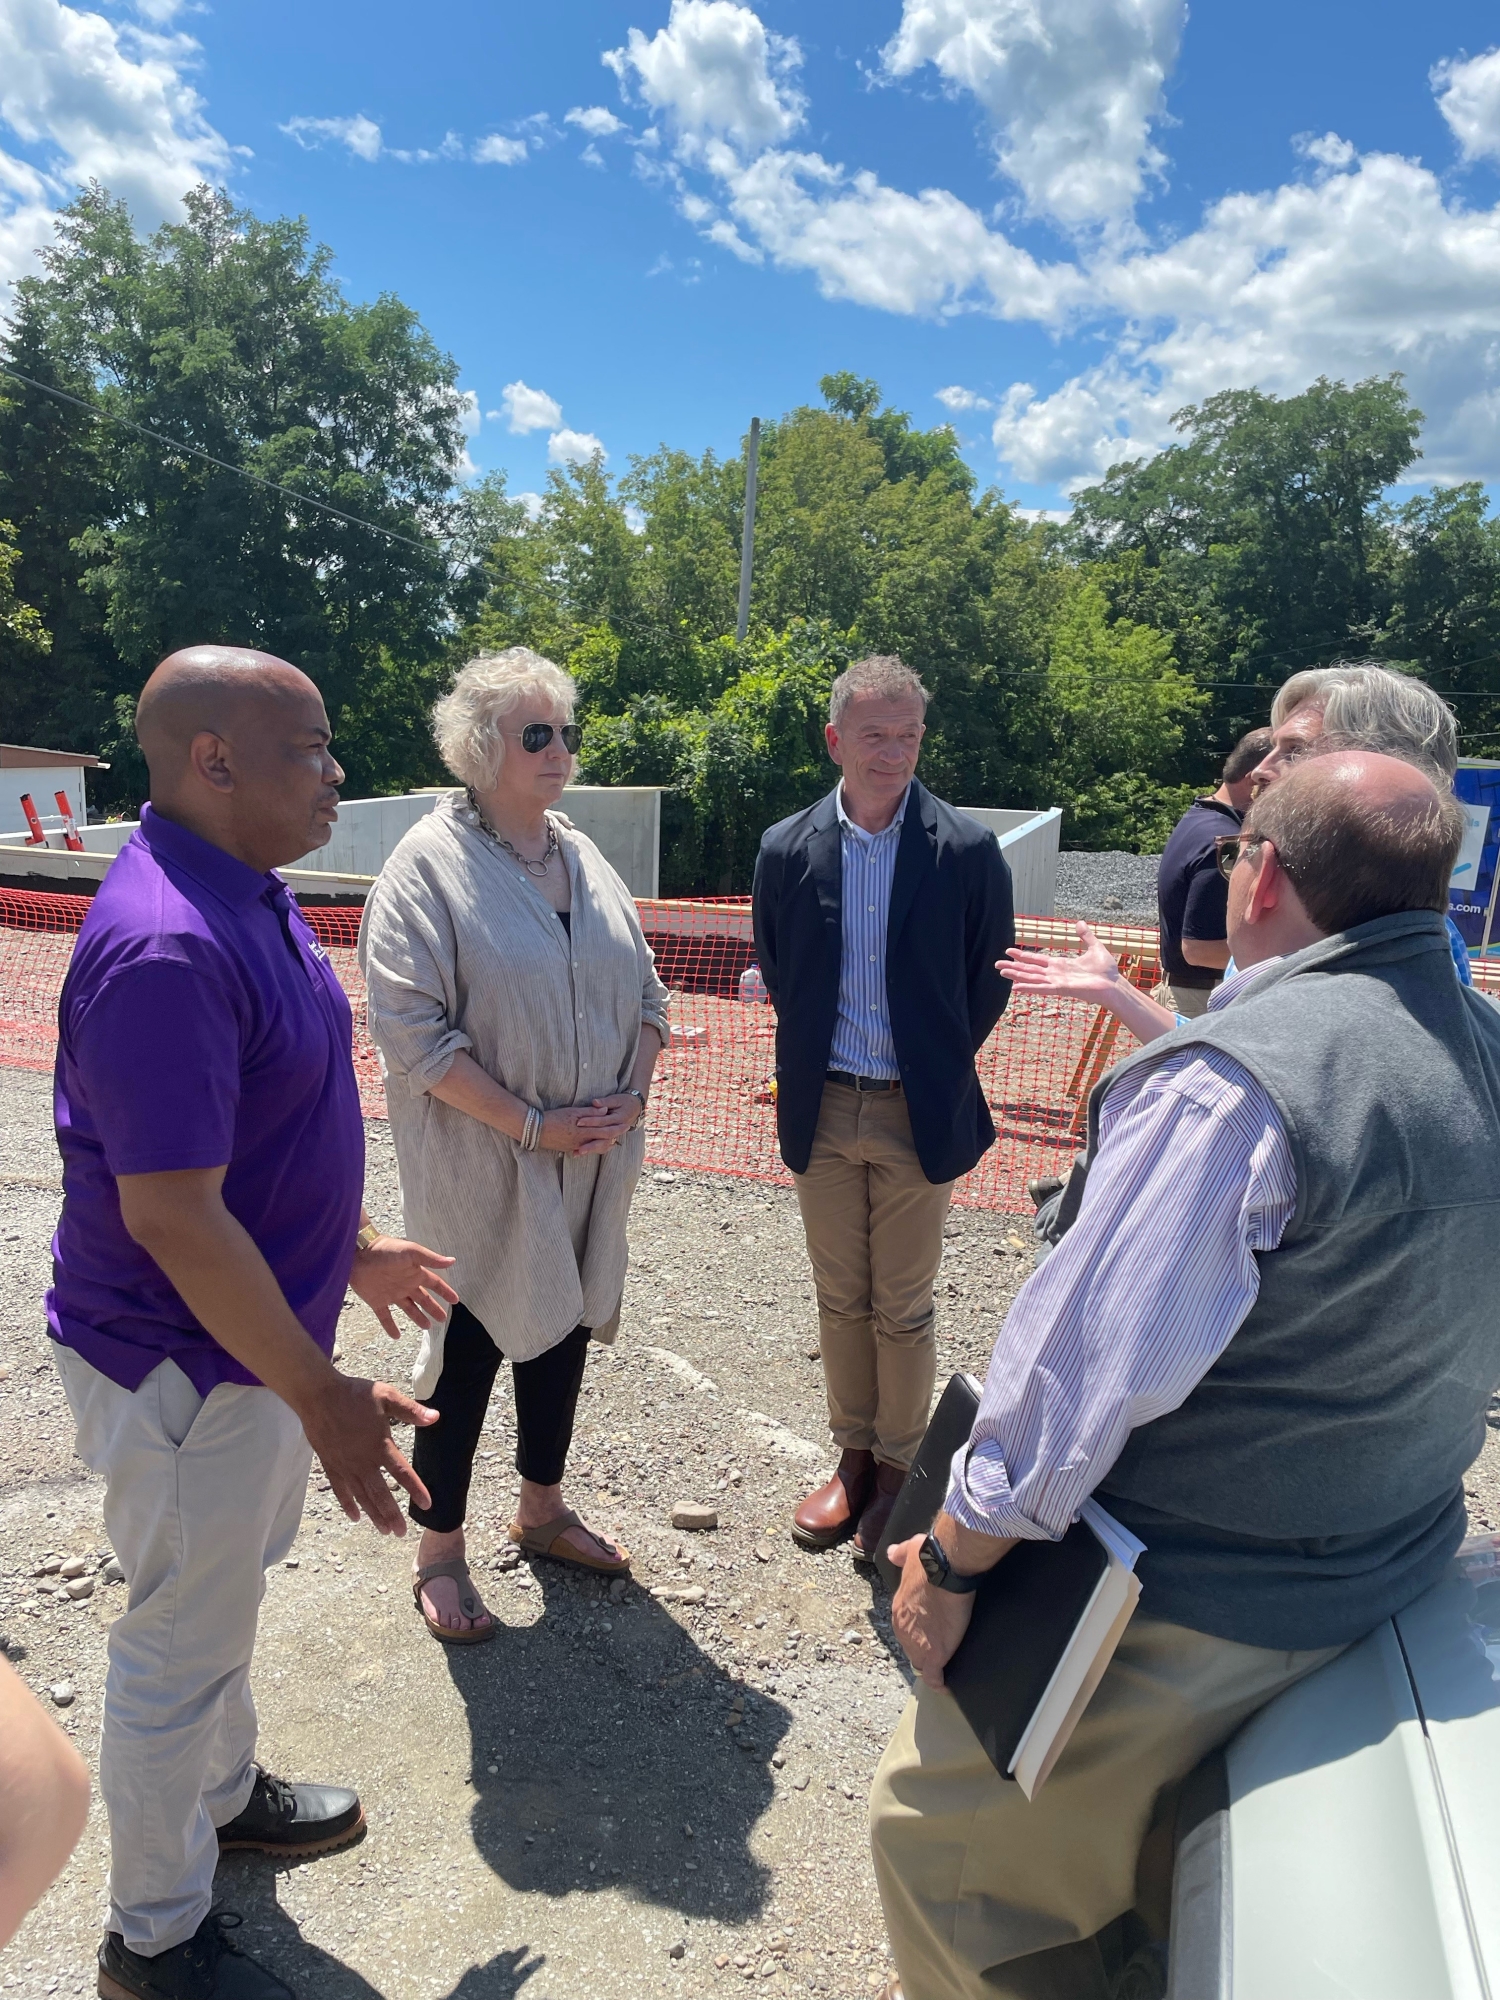 Pictured in the first photo with Speaker Heastie at the Habitat for Humanity build site is (from left to right) Assemblymember Didi Barrett and Columbia County Affordable Housing Taskforce member and architect Dennis Wedlick.